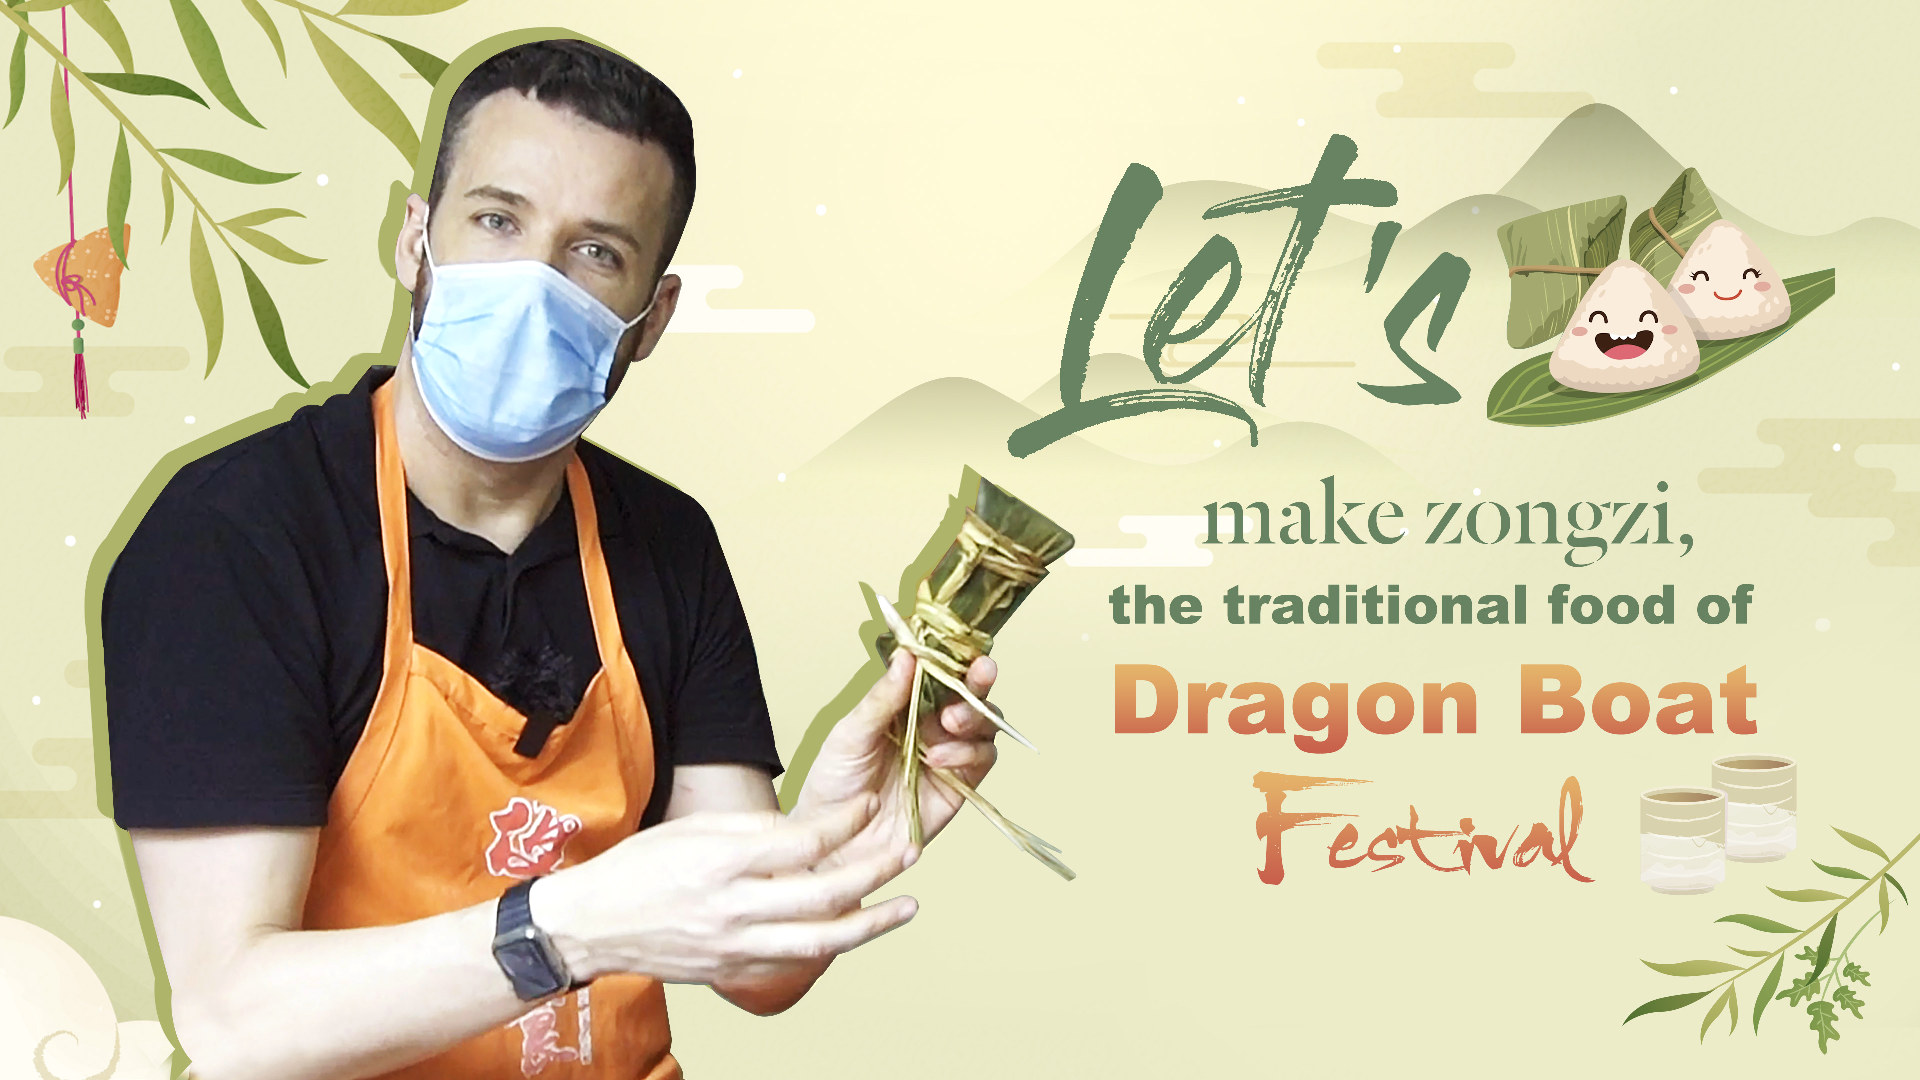 Let's make zongzi, the traditional food of Dragon Boat Festival CGTN